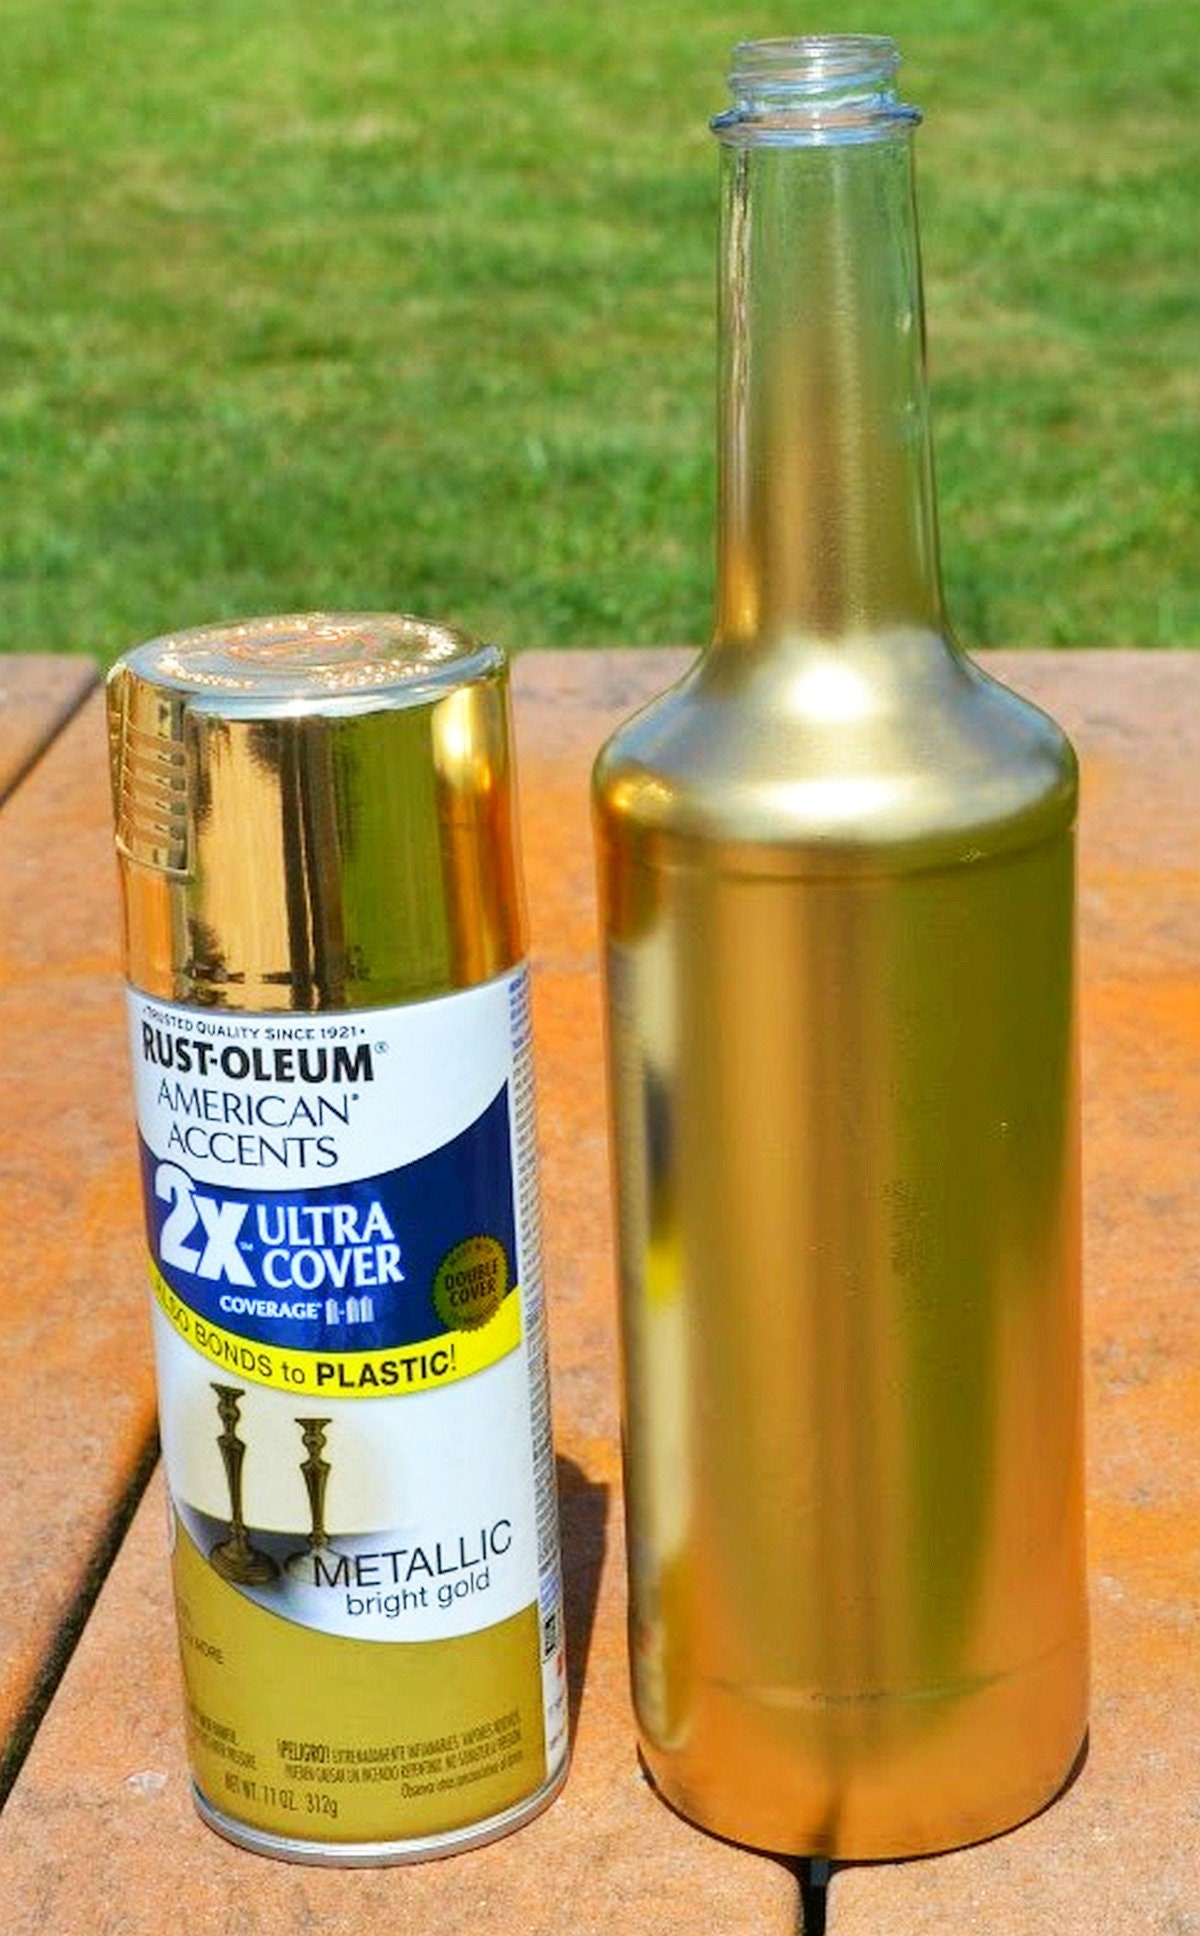 METALLIC GOLD Finish 11 Ounce Aerosol Spray Can Shiny Golden Paint AND  Primer Ultra Cover American Accents Rustoleum Rust-oleum 327909 -   Israel